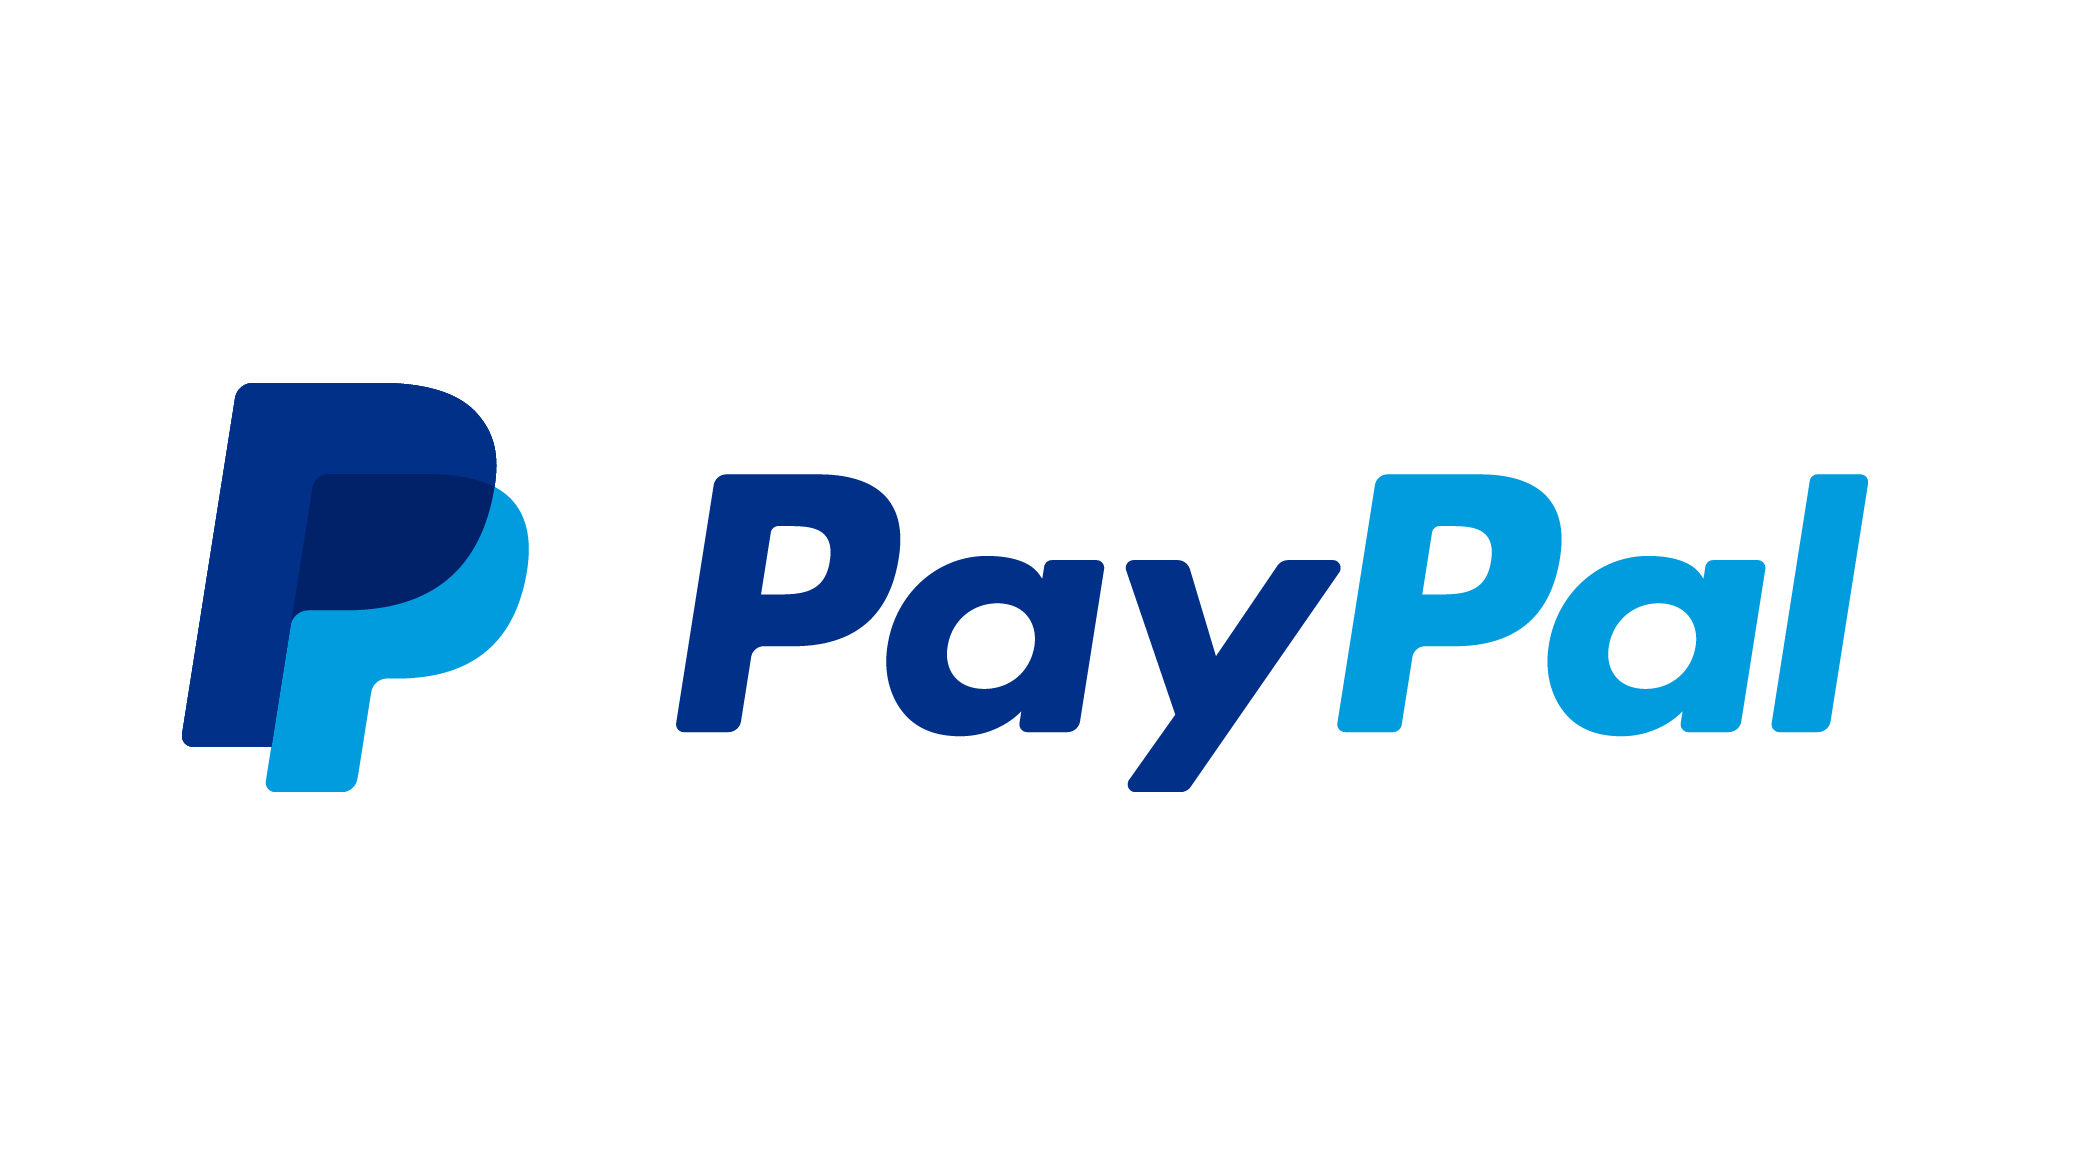 PayPal use in UK | Statista